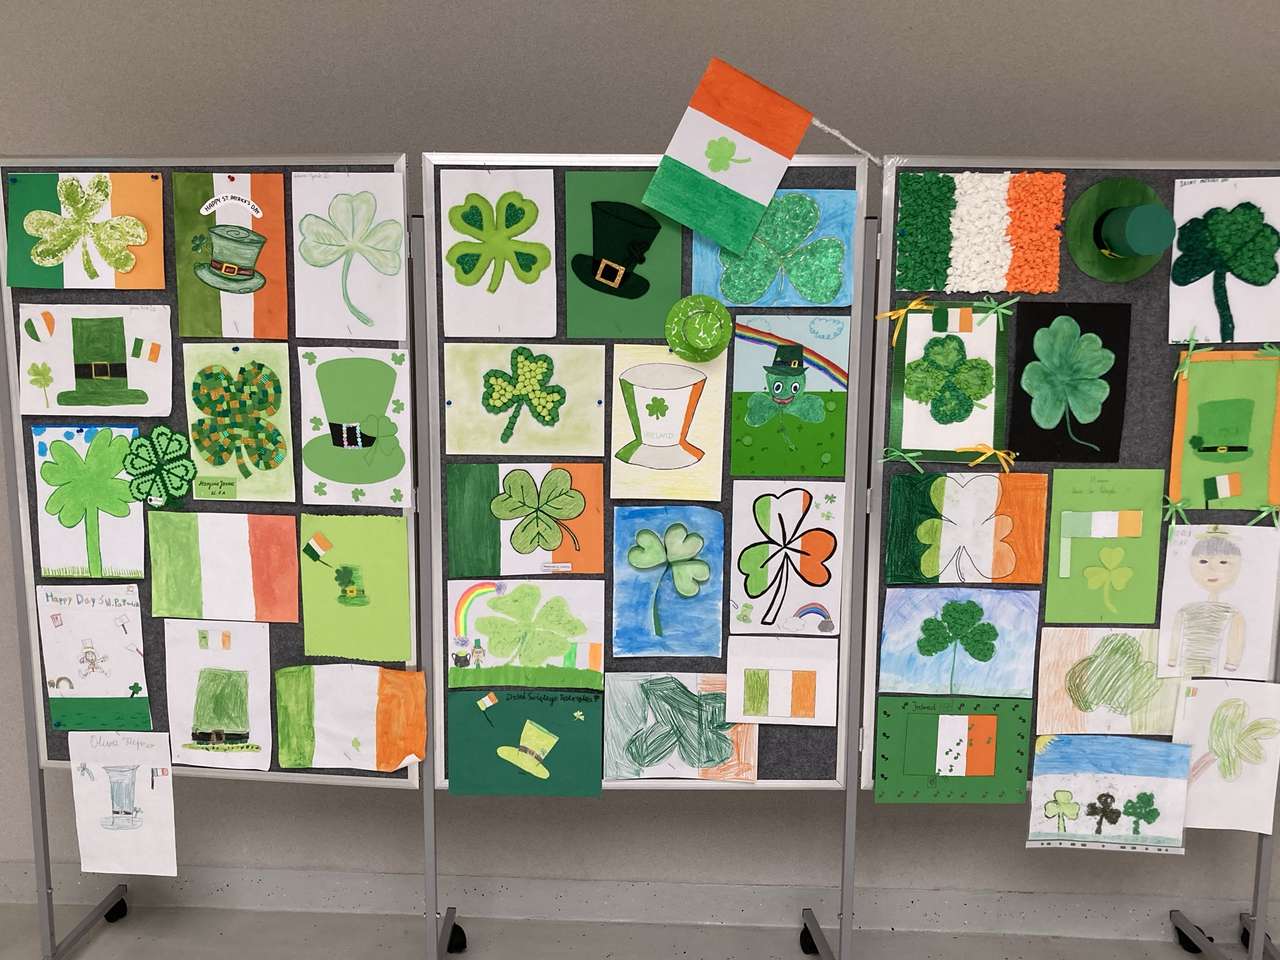 St. Patrick's Day at our school online puzzle